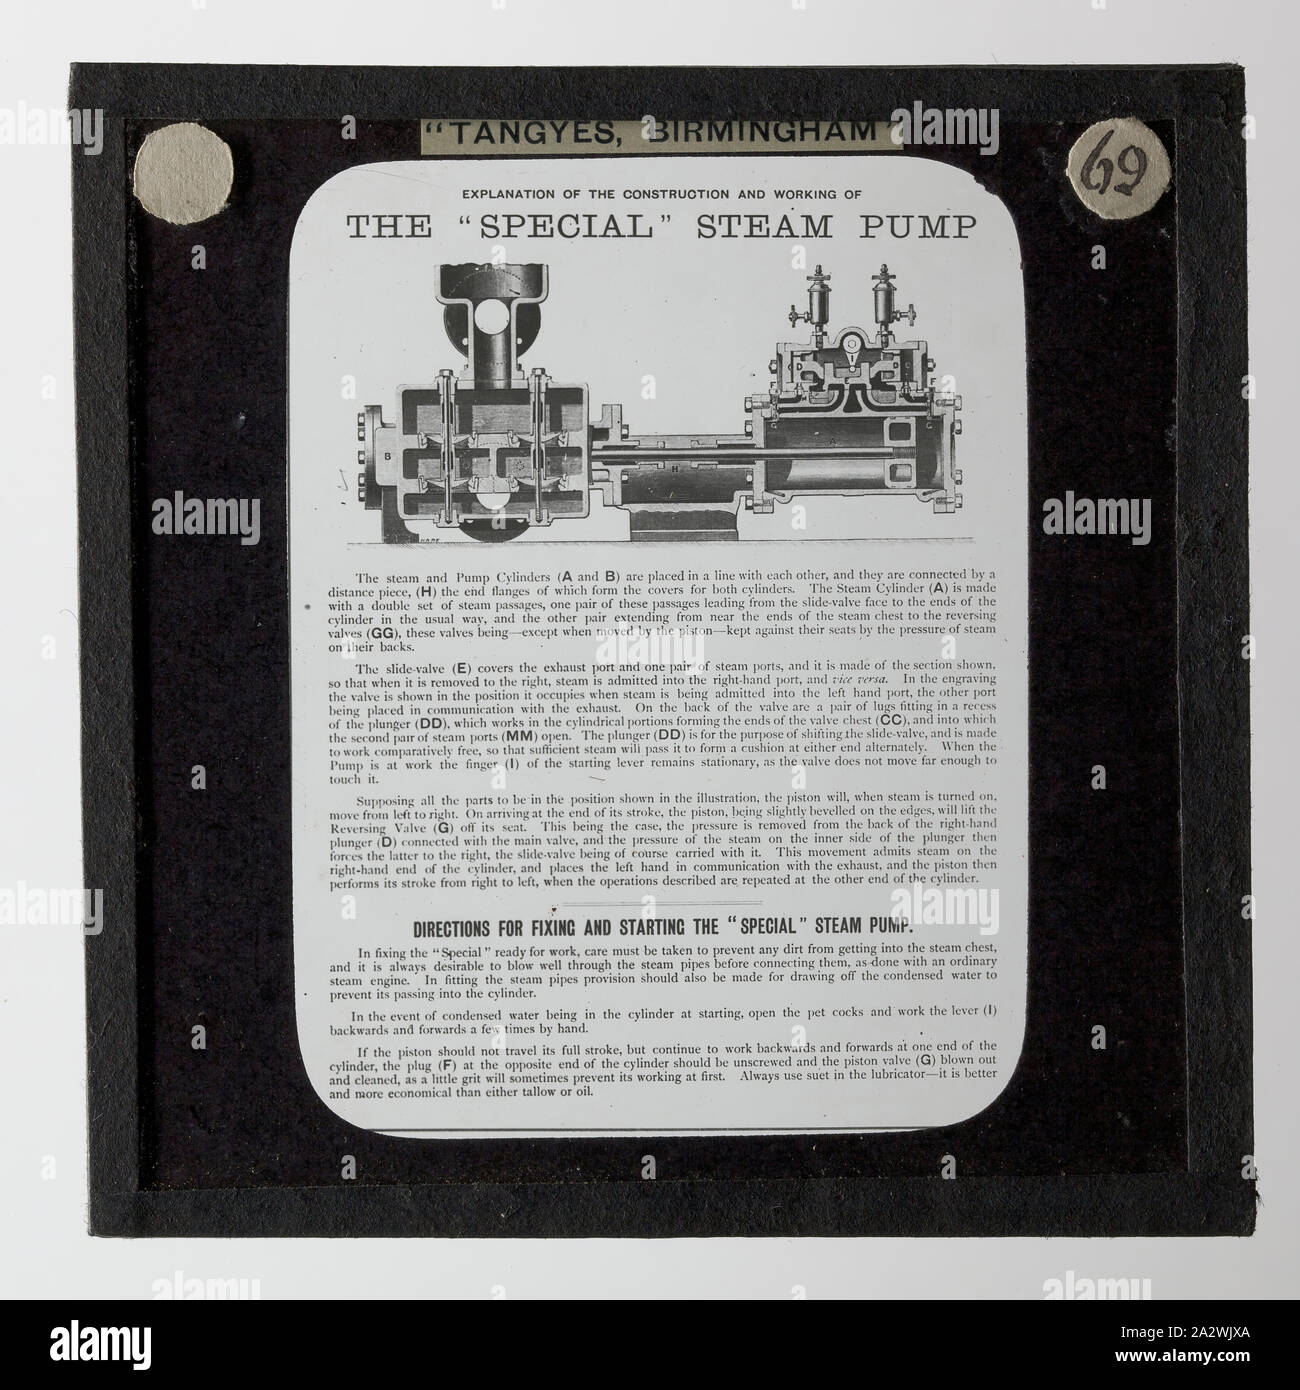 Lantern Slide - Tangyes Ltd, Special Steam Operated Positive Displacement Pump Advertisement, circa 1910, One of 239 glass lantern slides depicting products manufactured by Tangyes Limited engineers of Birmingham, England. The images include various products such as engines, centrifugal pumps, hydraulic pumps, gas producers, materials testing machines, presses, machine tools, hydraulic jacks etc. Tangyes was a company which operated from 1857 to 1957. They produced a wide variety of engineering Stock Photo